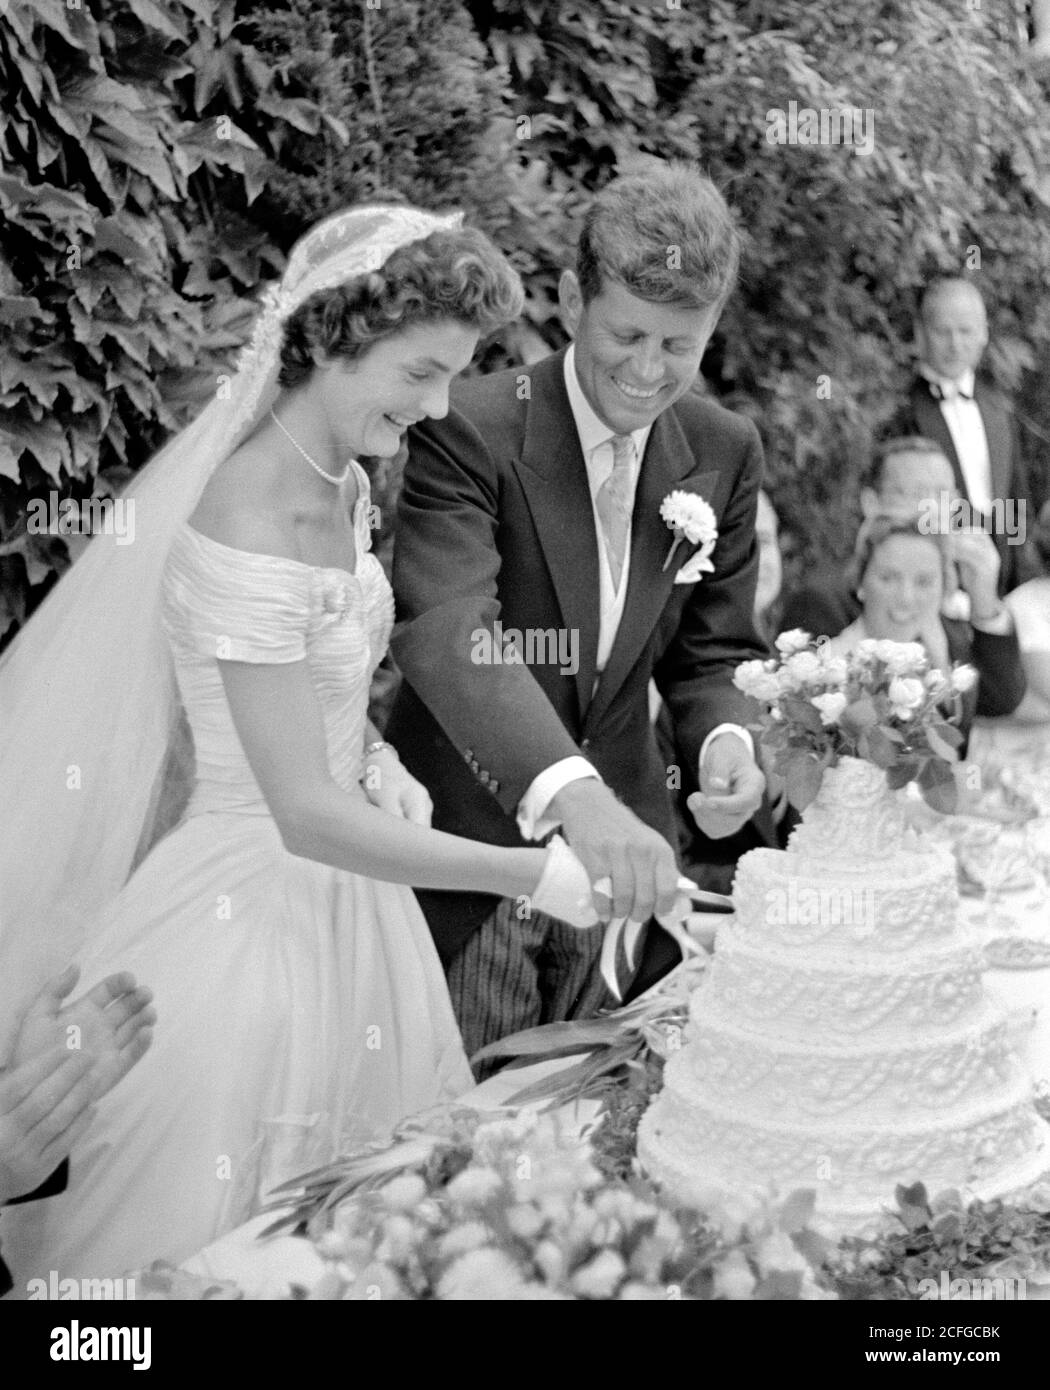 The wedding of Senator John F Kennedy to Jacqueline Bouvier in Newport, RI on September 12, 1953. The couple cutting the cake at their wedding reception. Stock Photo